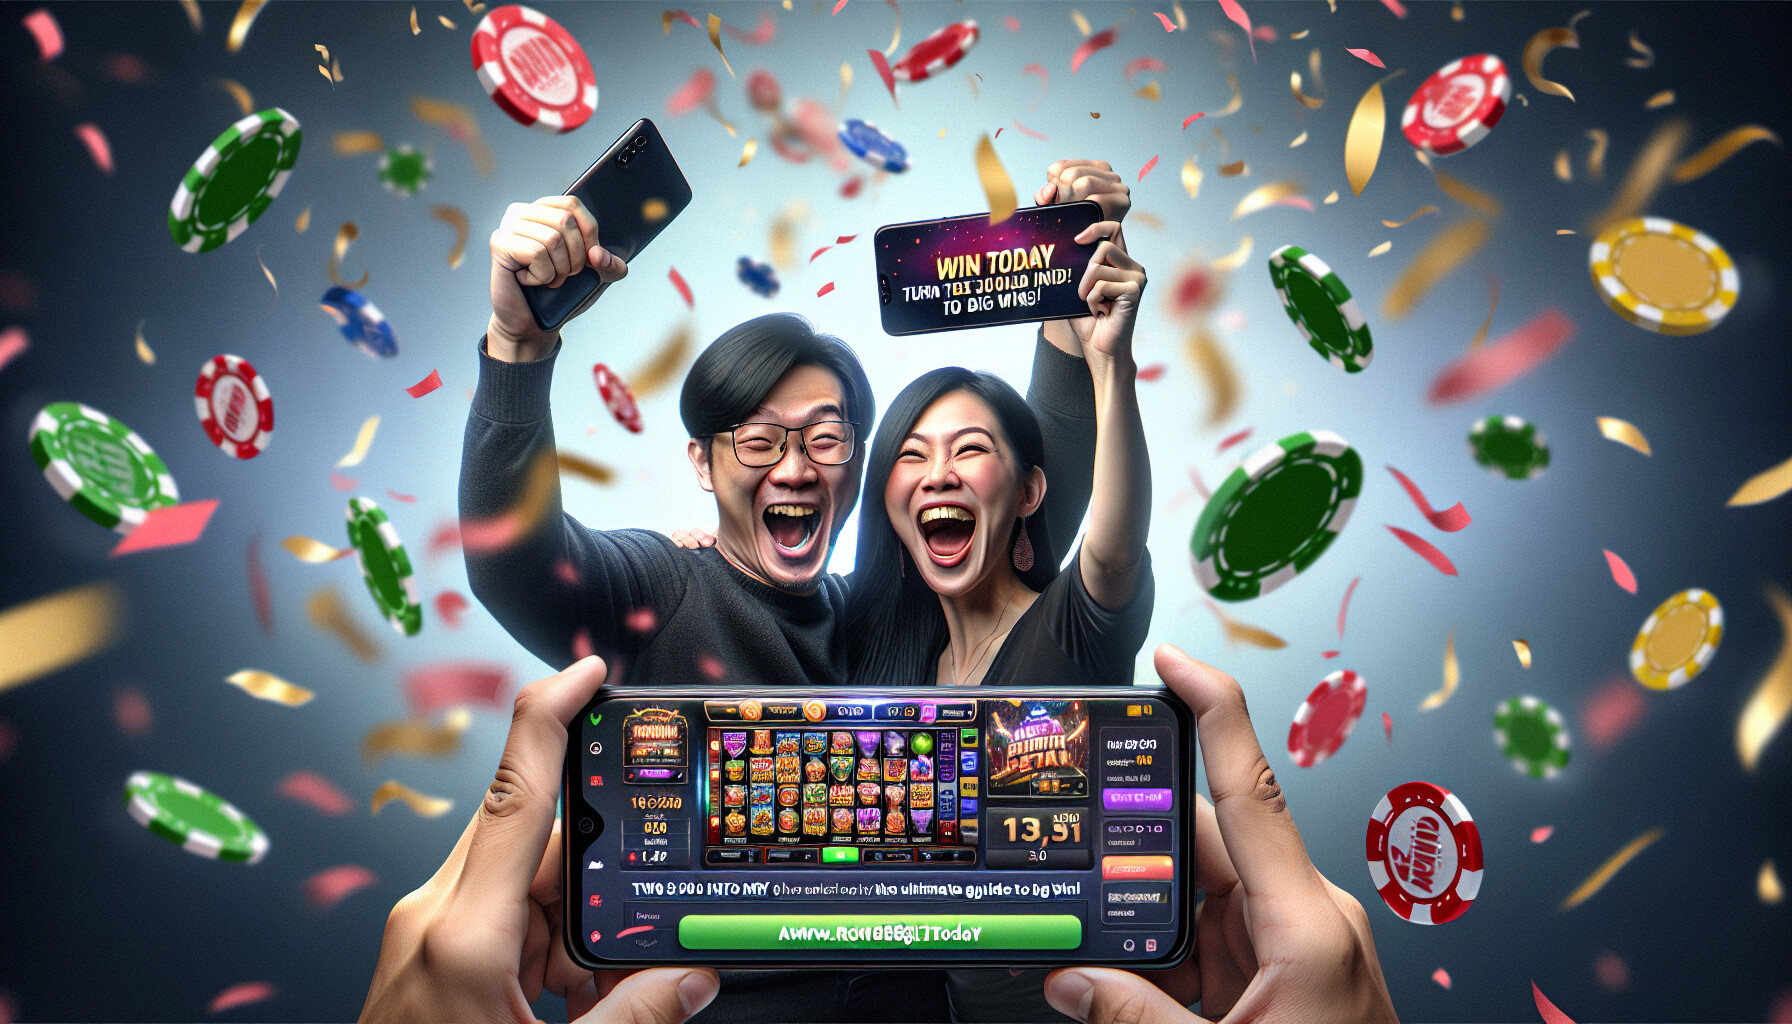 🎰 Want to turn MYR 200 into MYR 1,300? Discover the ultimate beginner's guide to online casino success with Rollex11! Easy steps and big wins await! 💰🍀 #onlinecasino #success #Rollex11